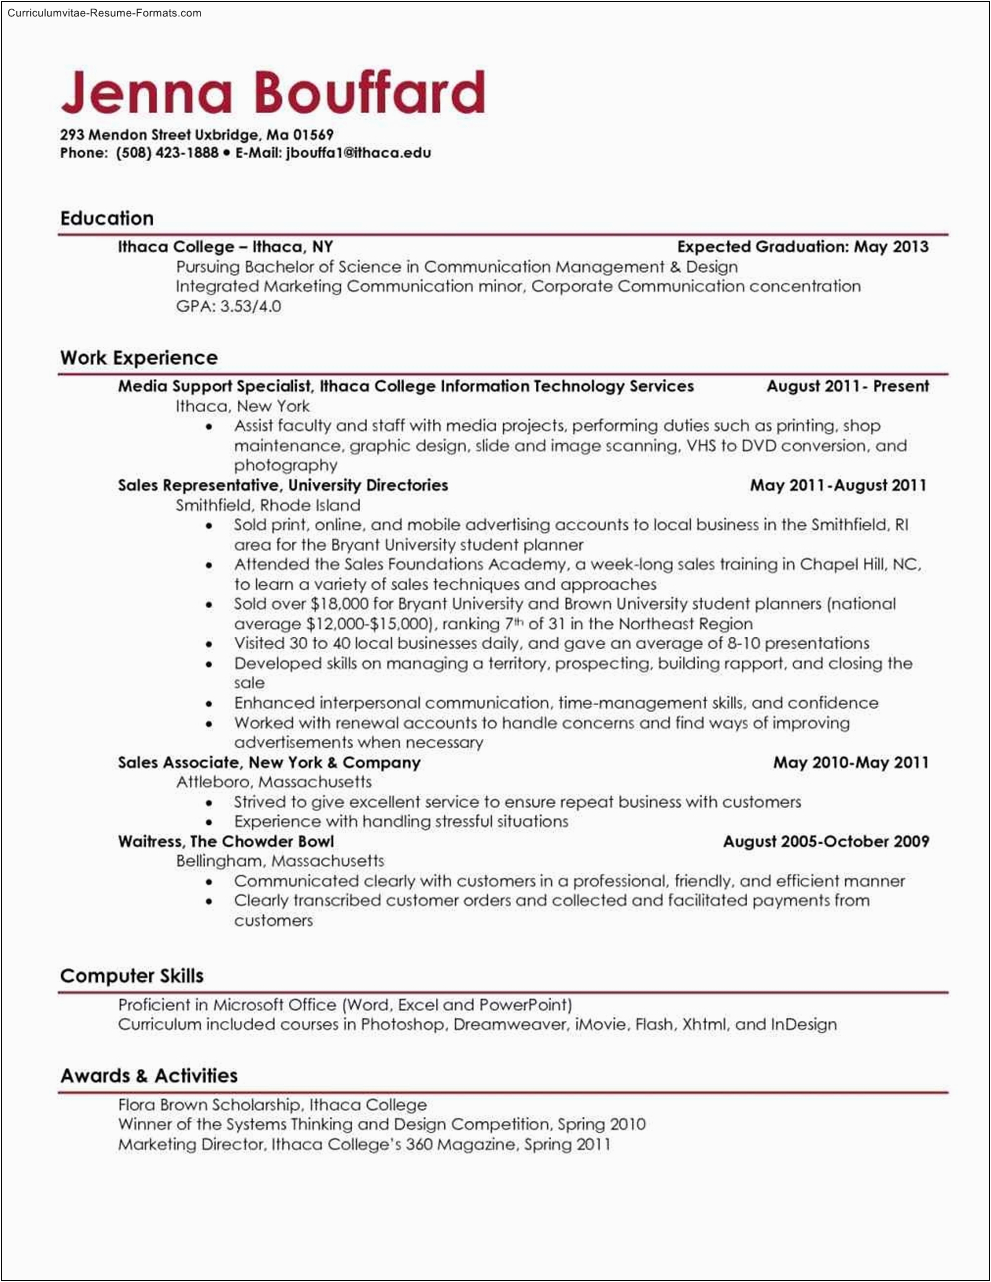 Free Resume Samples for College Students College Resume Template Download